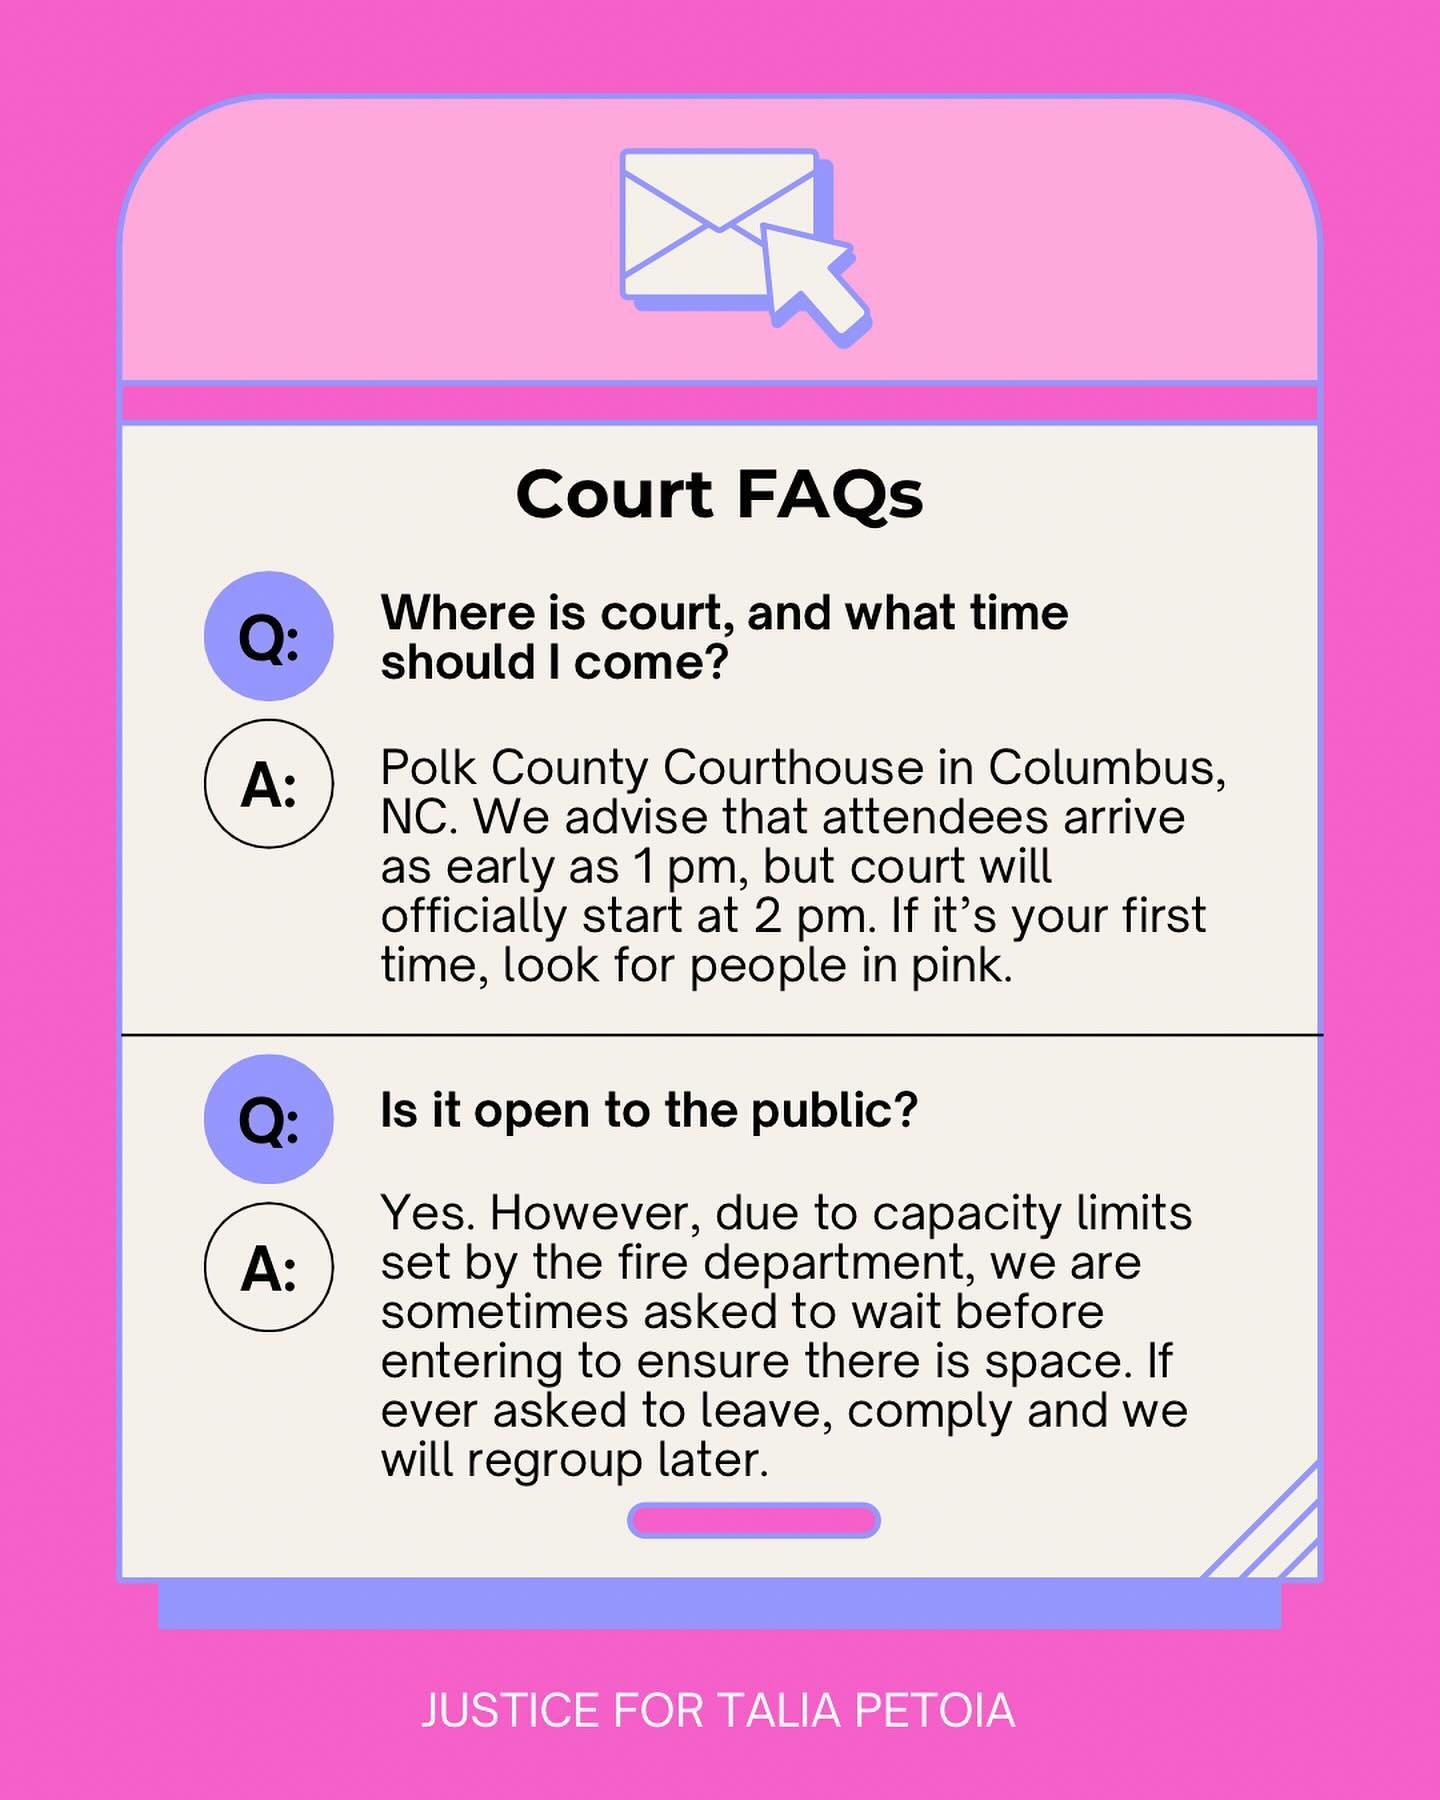 COURT FAQs
Have questions left unanswered? Comment below or message us. We are happy to provide answers if possible. 

We will see you all Monday. 

#justicefortaliapetoia #friendsoftalia